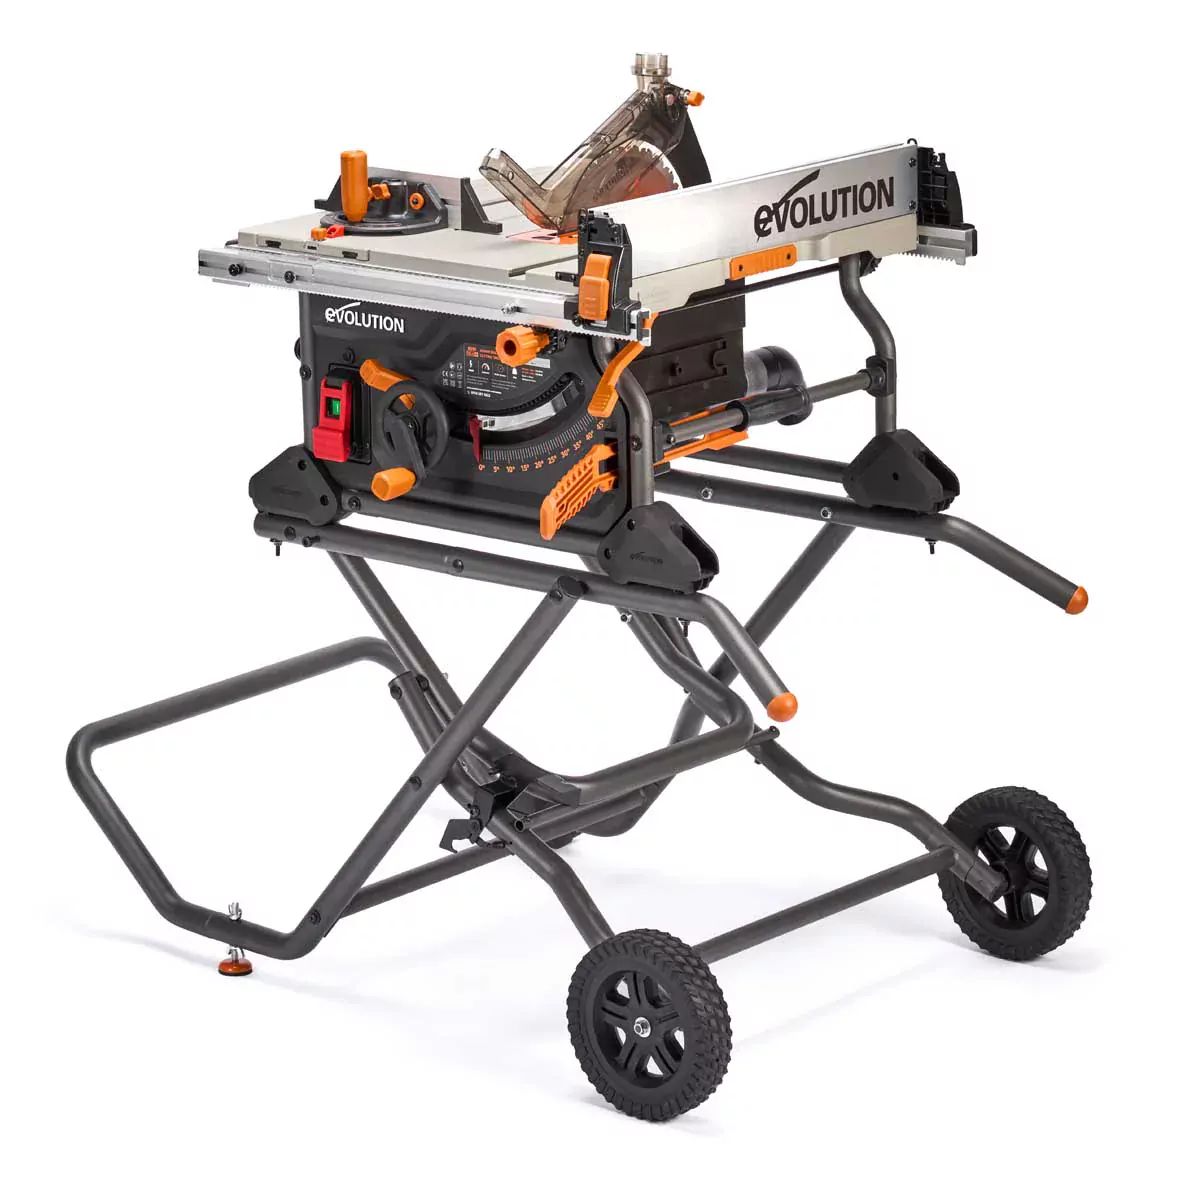 R255TBLX+ Portable Jobsite Table Saw with stand